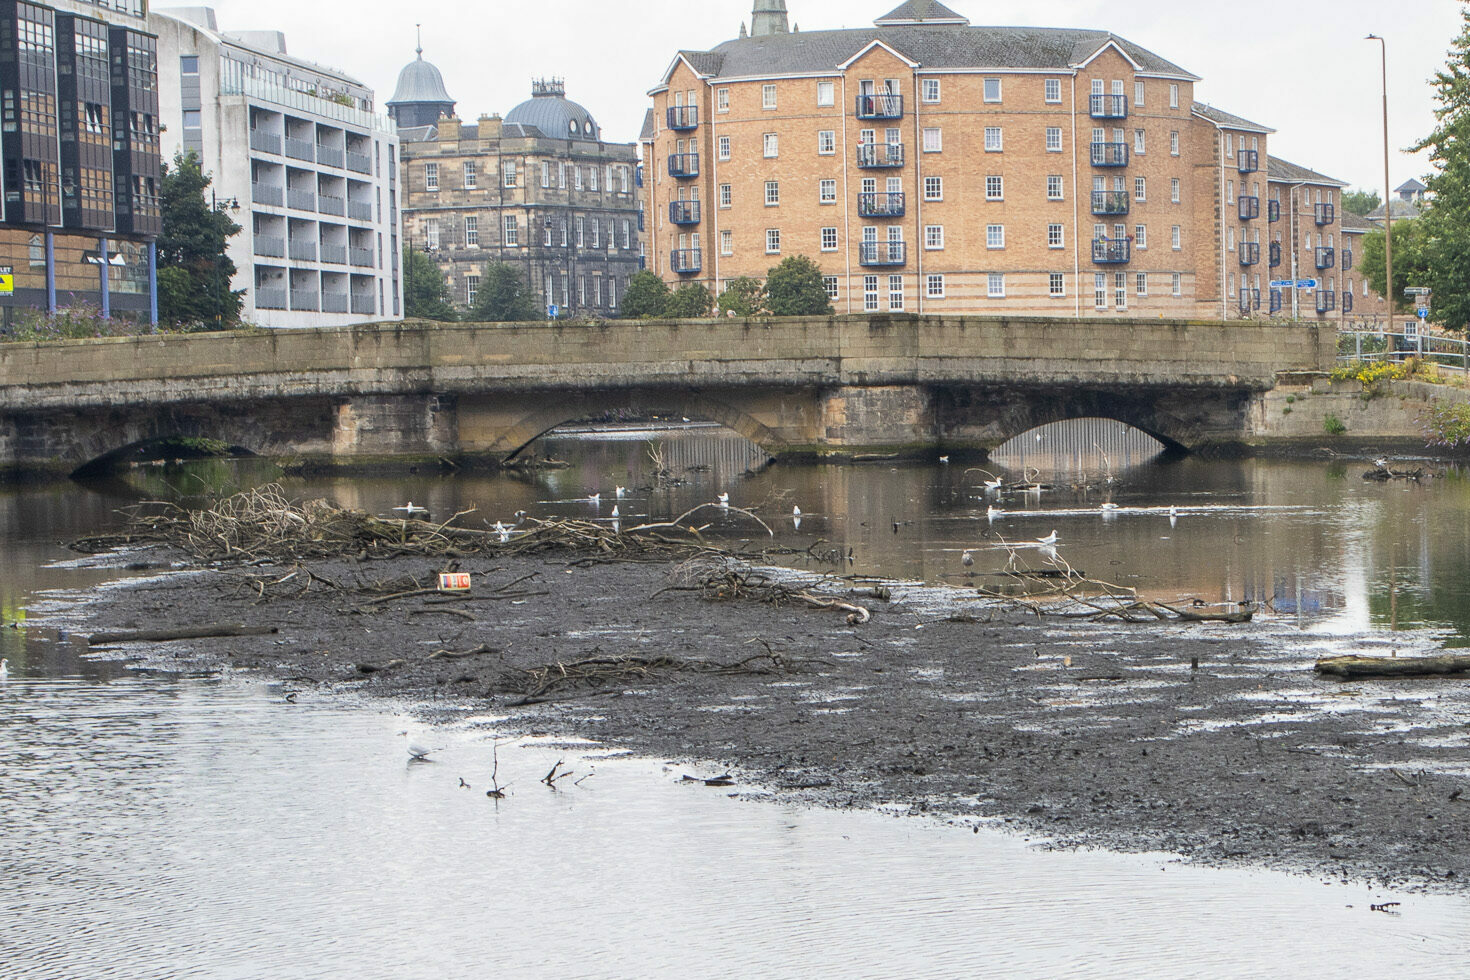 Sandport Bridge, 2023. The water level in Water of Leith has risen considerably, with debris floating on the surface. 